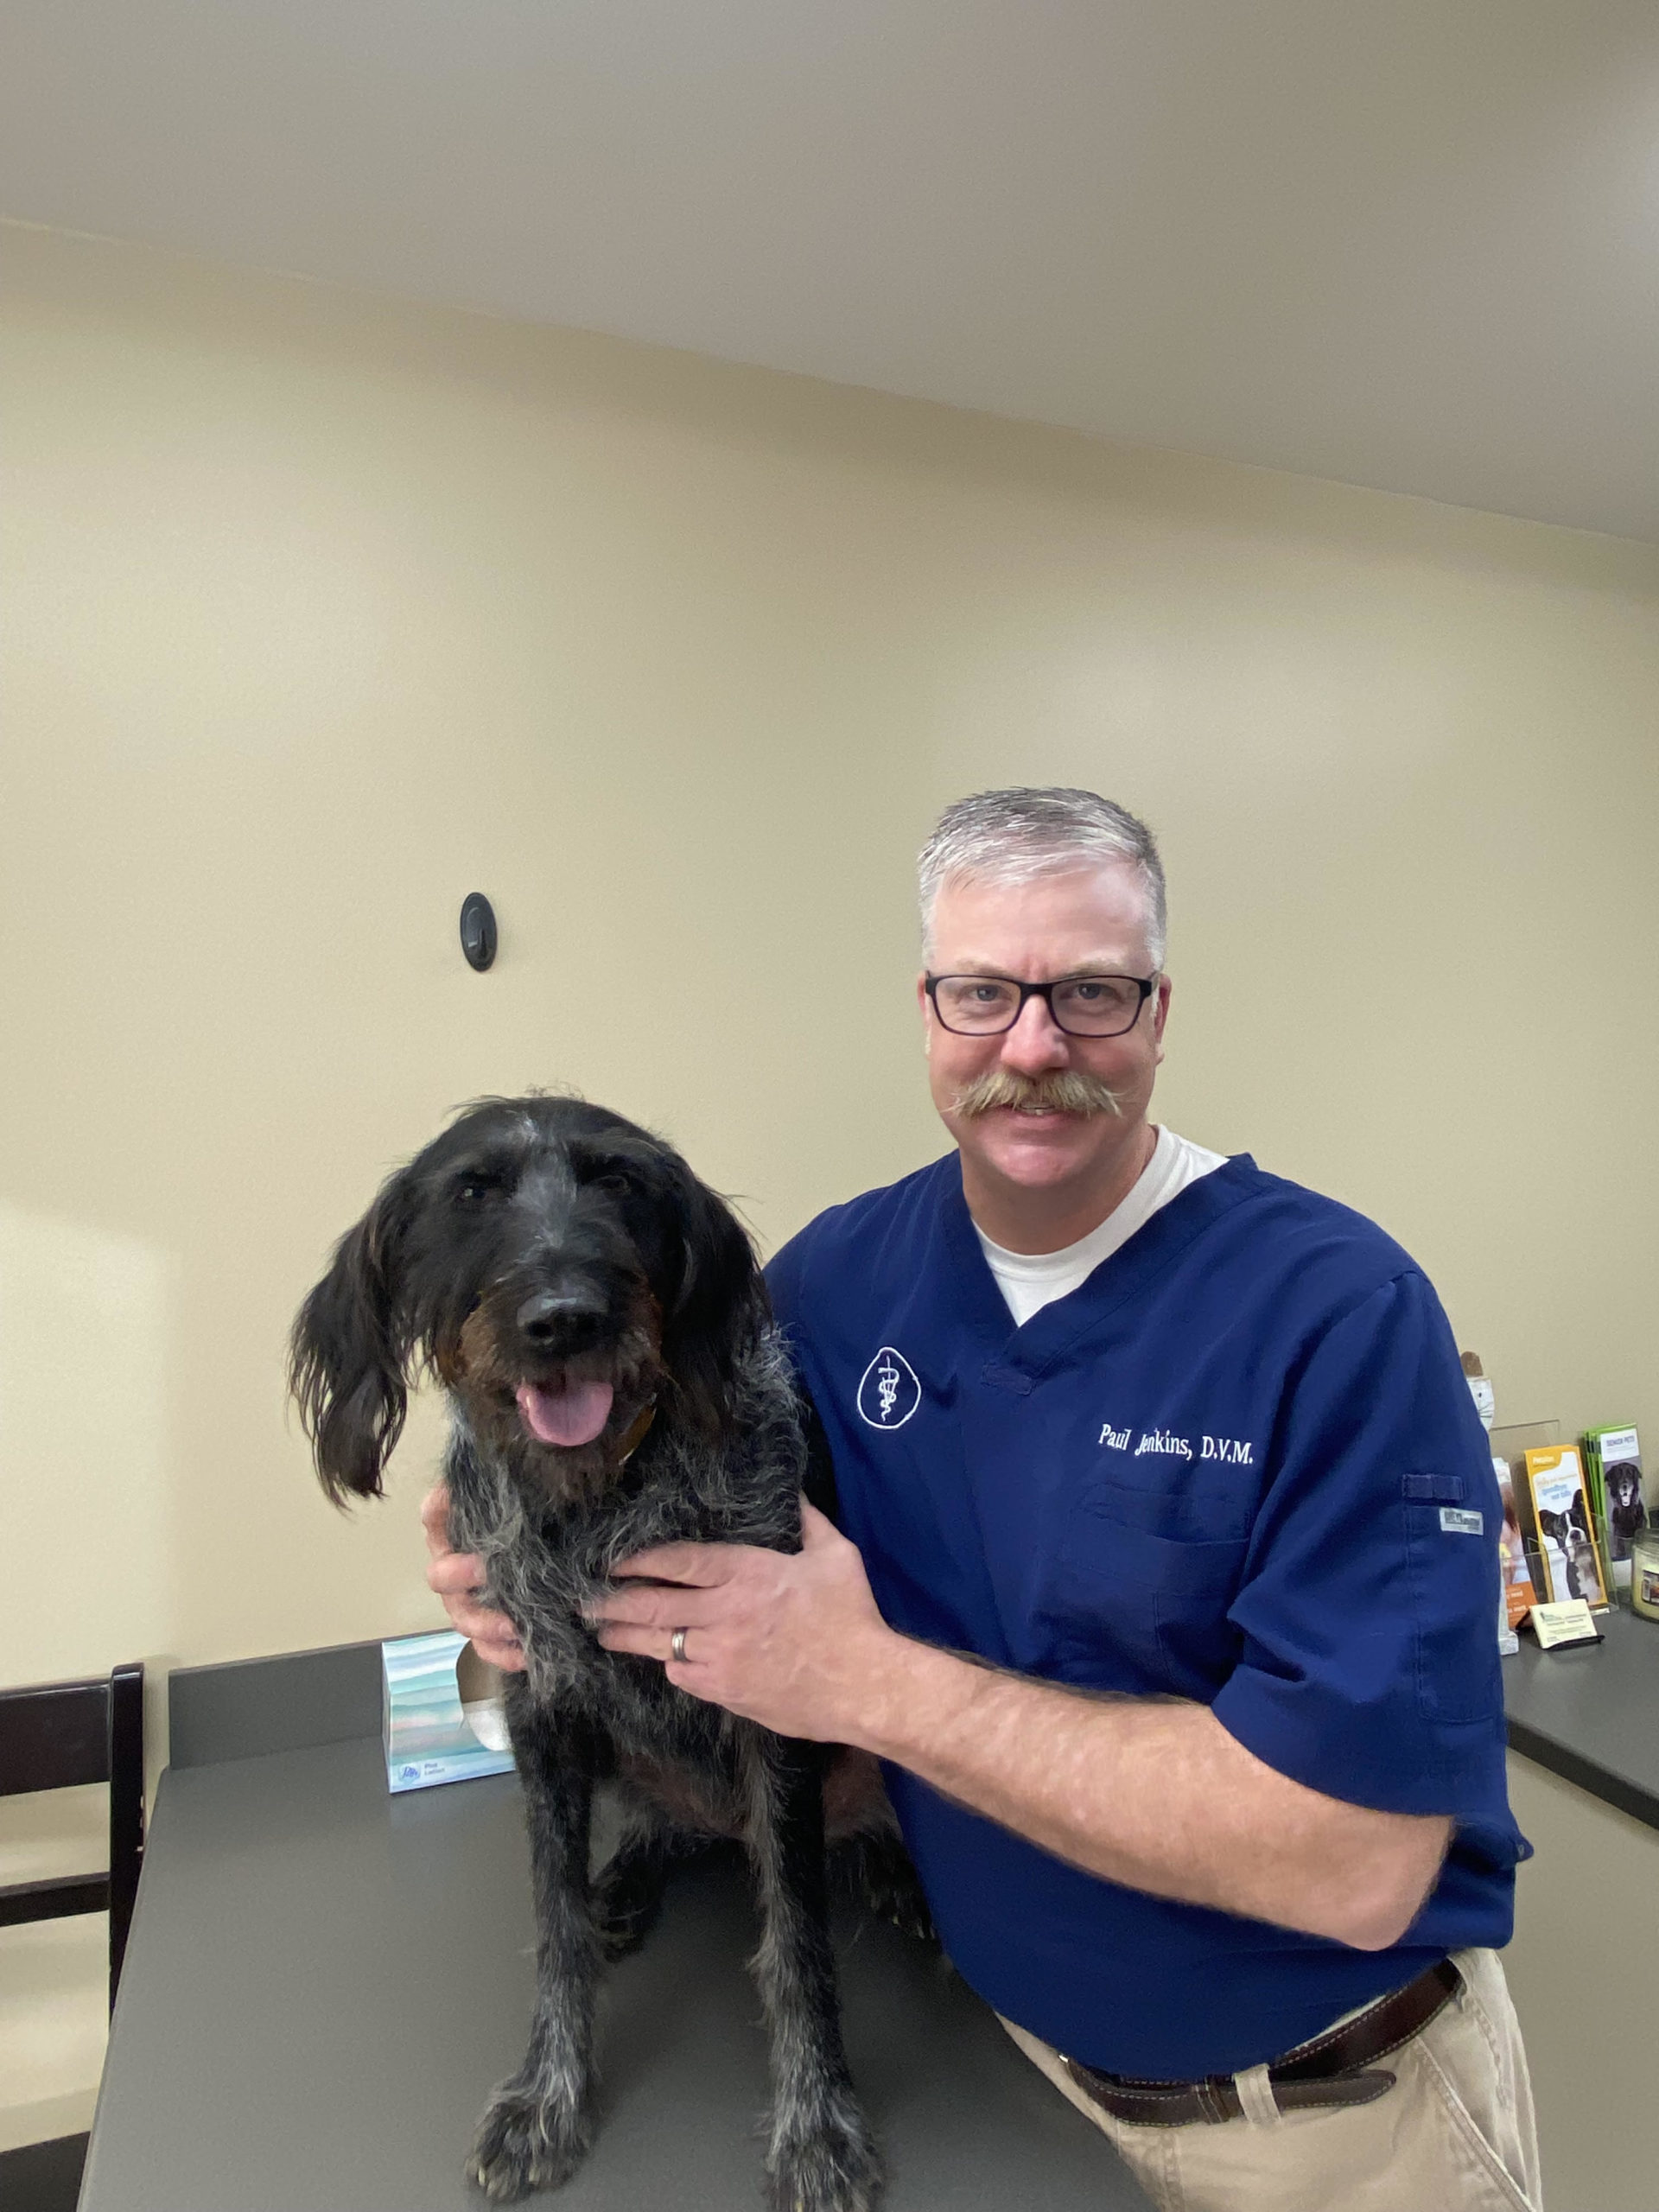 J. Paul Jenkins DVM, veterinarian at Vilonia Animal Clinic in Conway, AR, wearing a blue shirt and khaki pants while holding a large black dog on a table